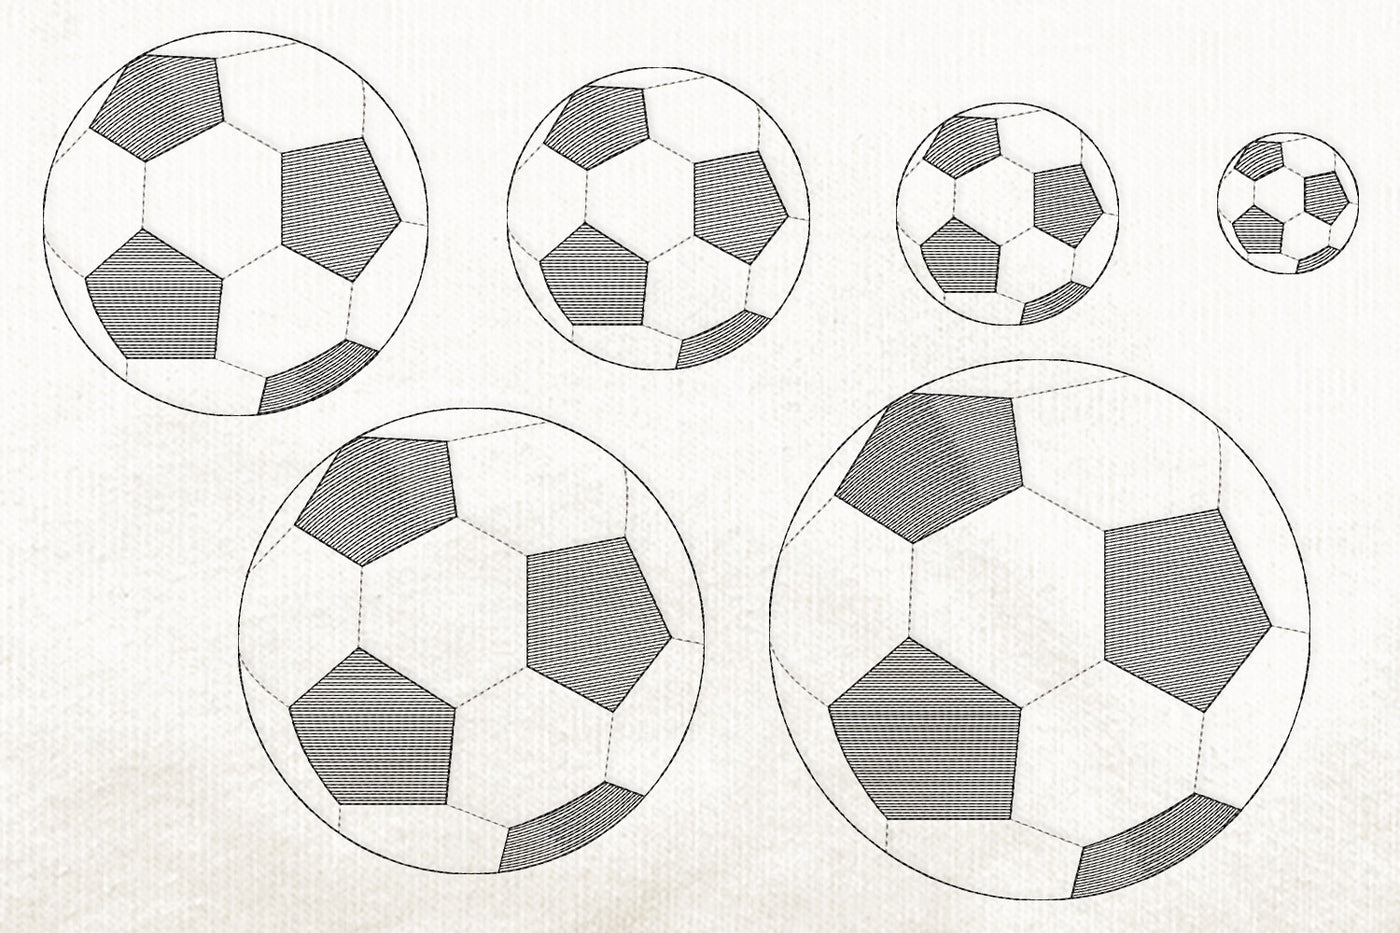 Soccer Ball linework embroidery design file in 6 sizes